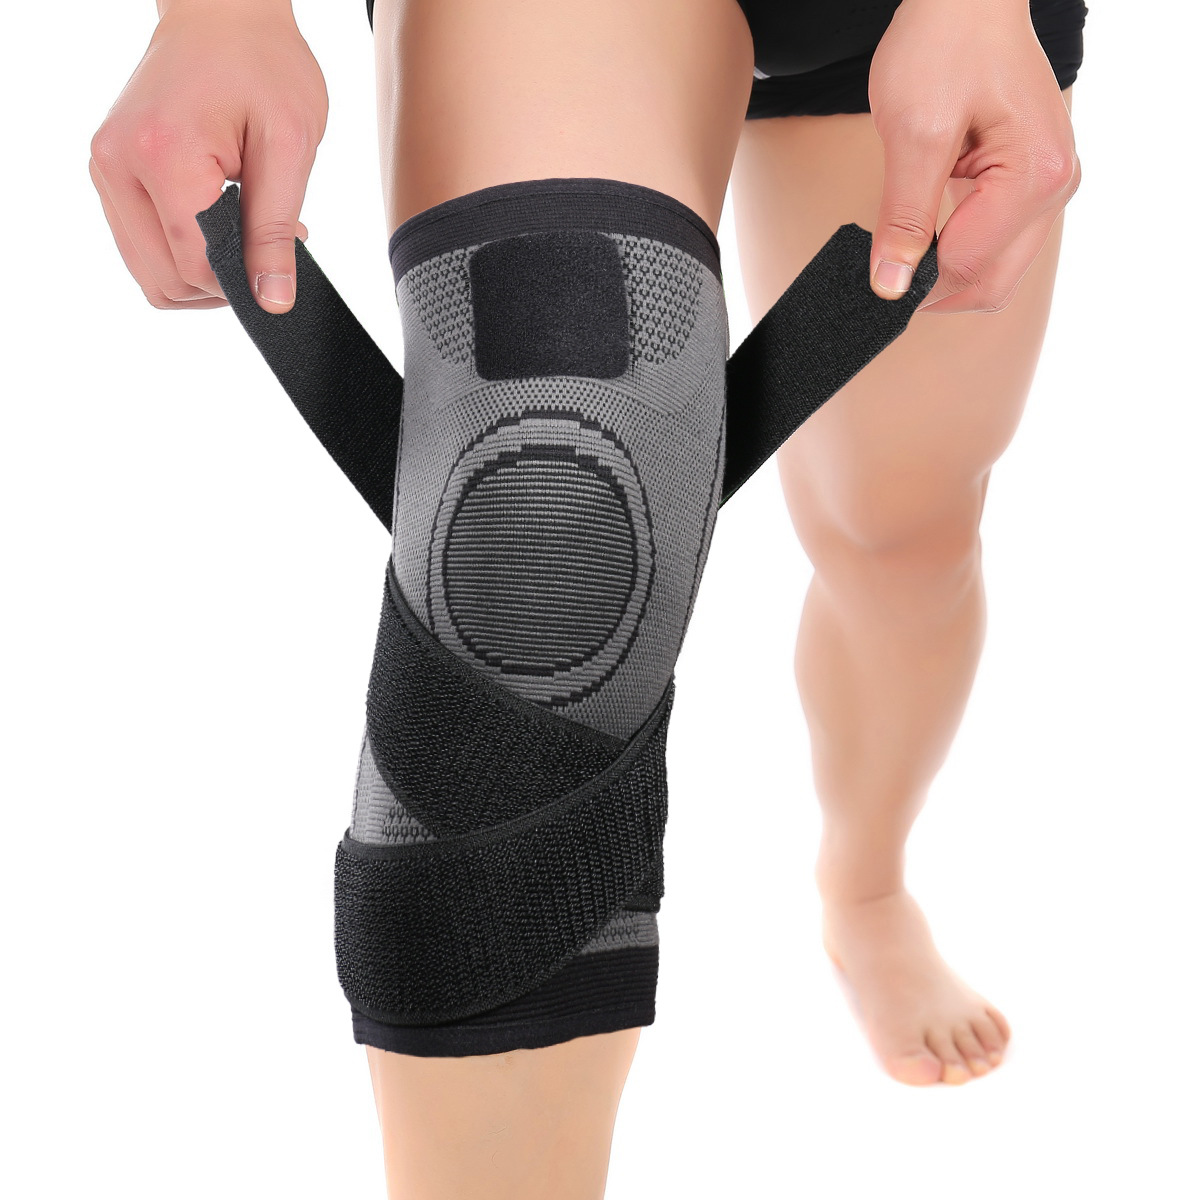 Knee Brace for Joint Pain and Arthritis Relief